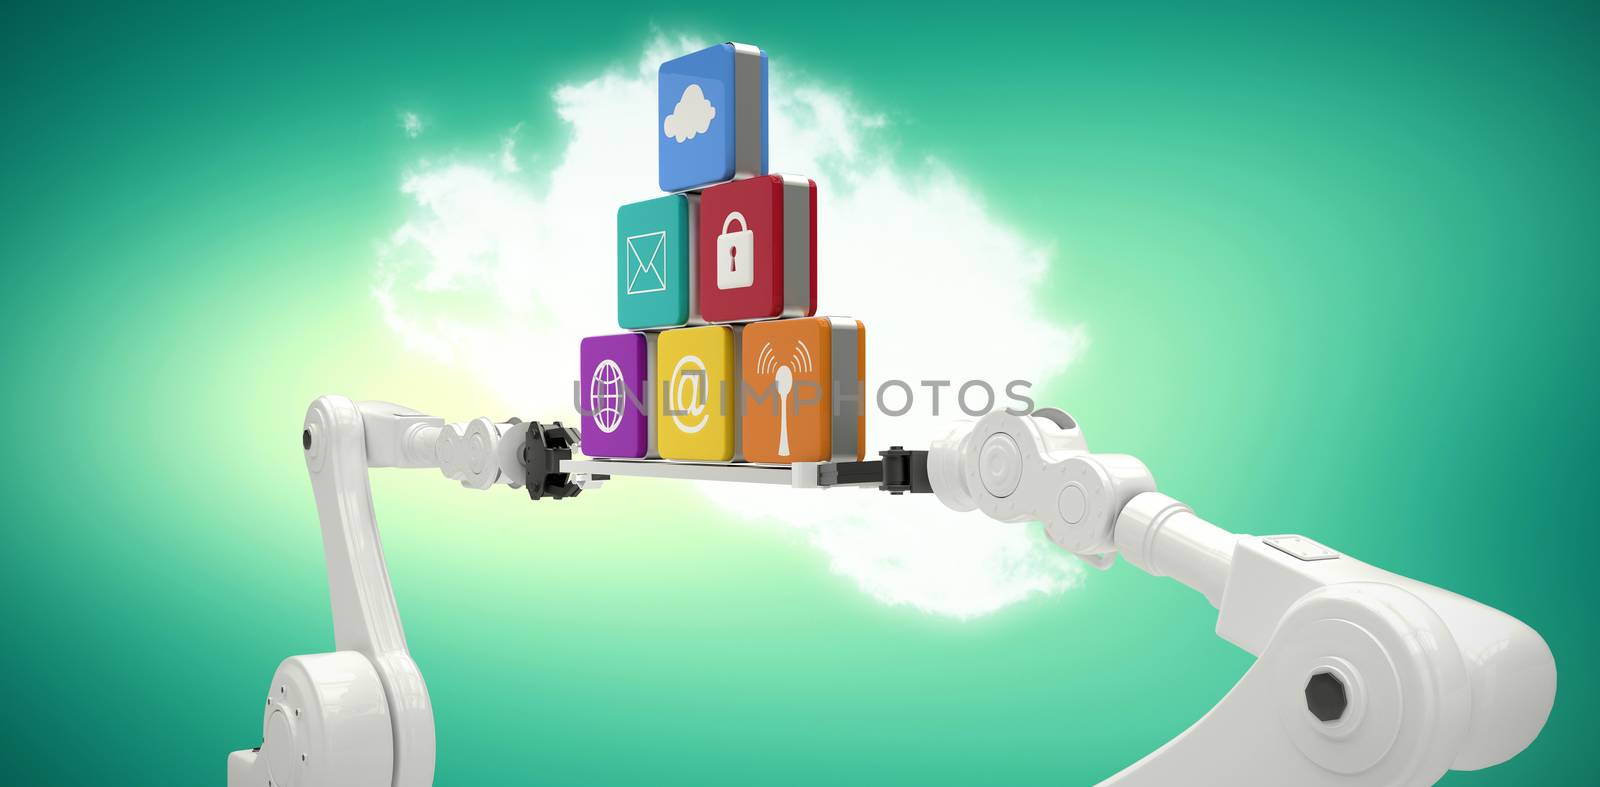 White robotic hands holding computer icons on white background against green vignette background